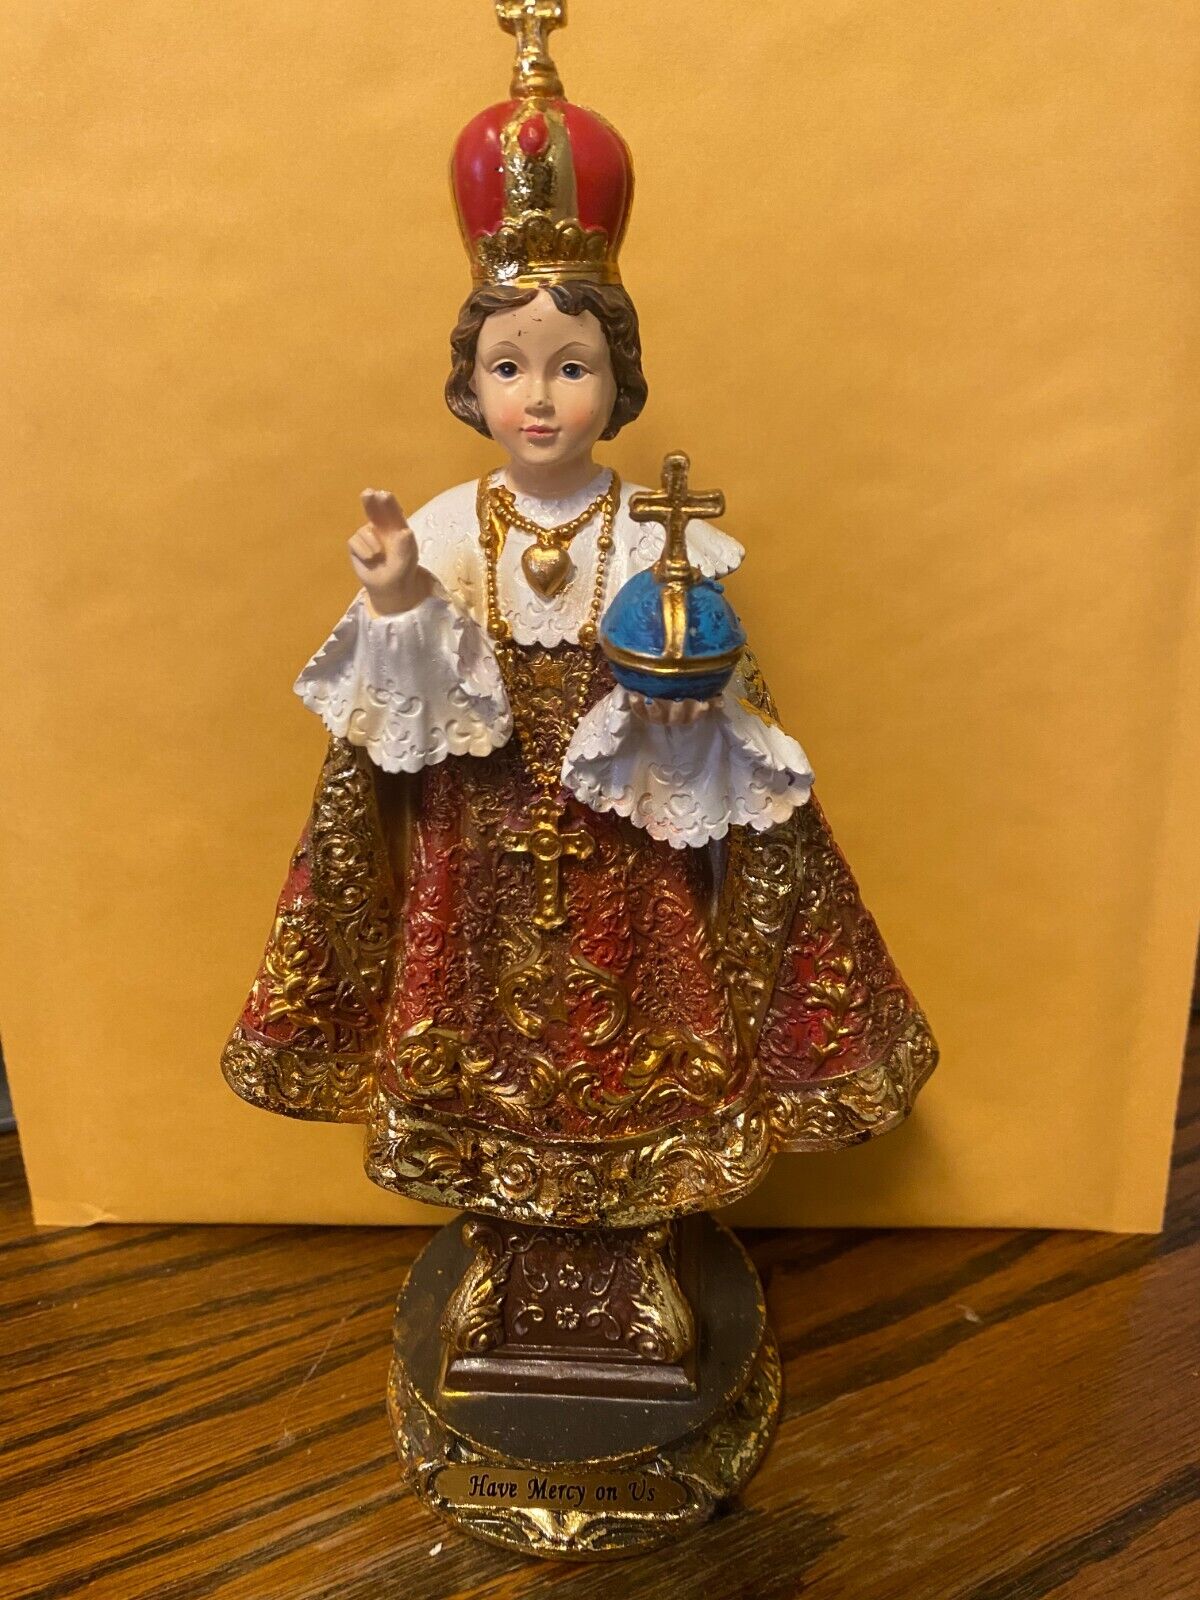 Infant Jesus of Prague 8.75" Statue, New - Bob and Penny Lord